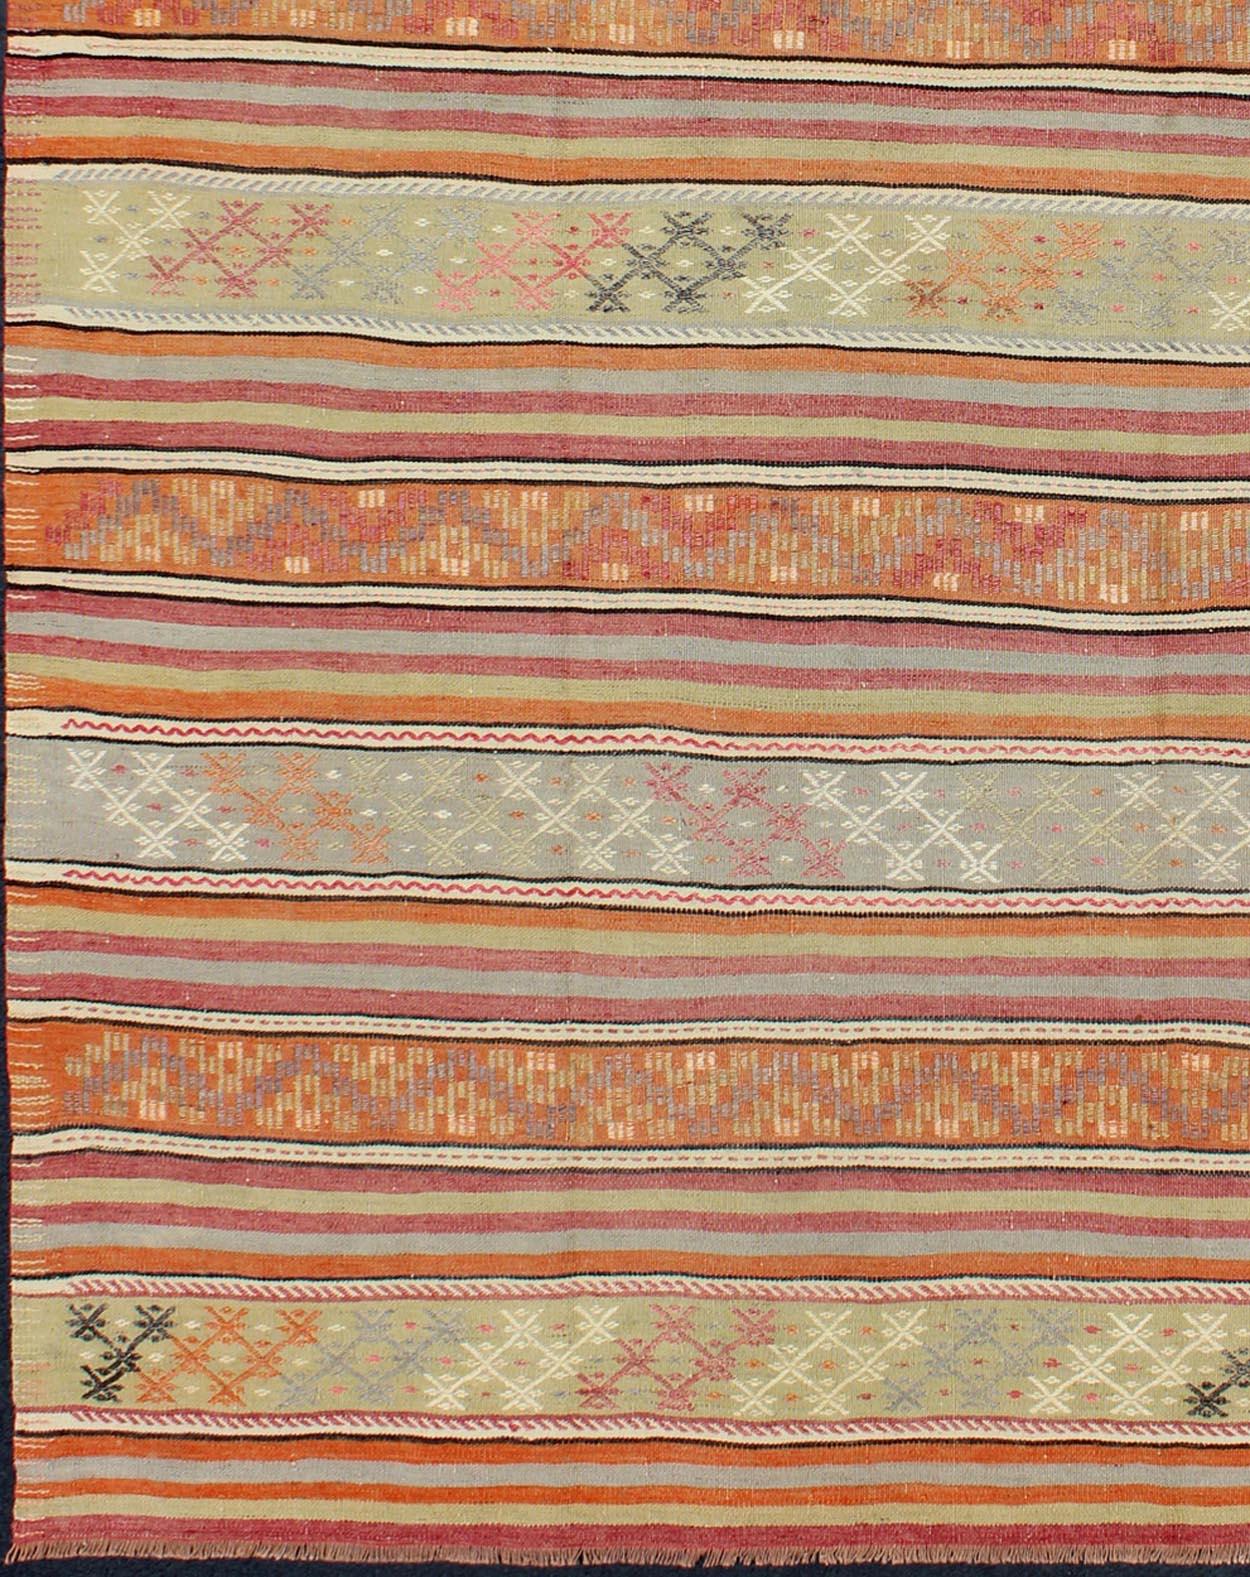 Turkish Kilim vintage rug with assorted stripe design, rug TU-NED-122, country of origin / type: Turkey / Kilim, circa mid-20th century

Featuring a repeating horizontal stripe design, with an assortment of geometric motifs throughout, this unique